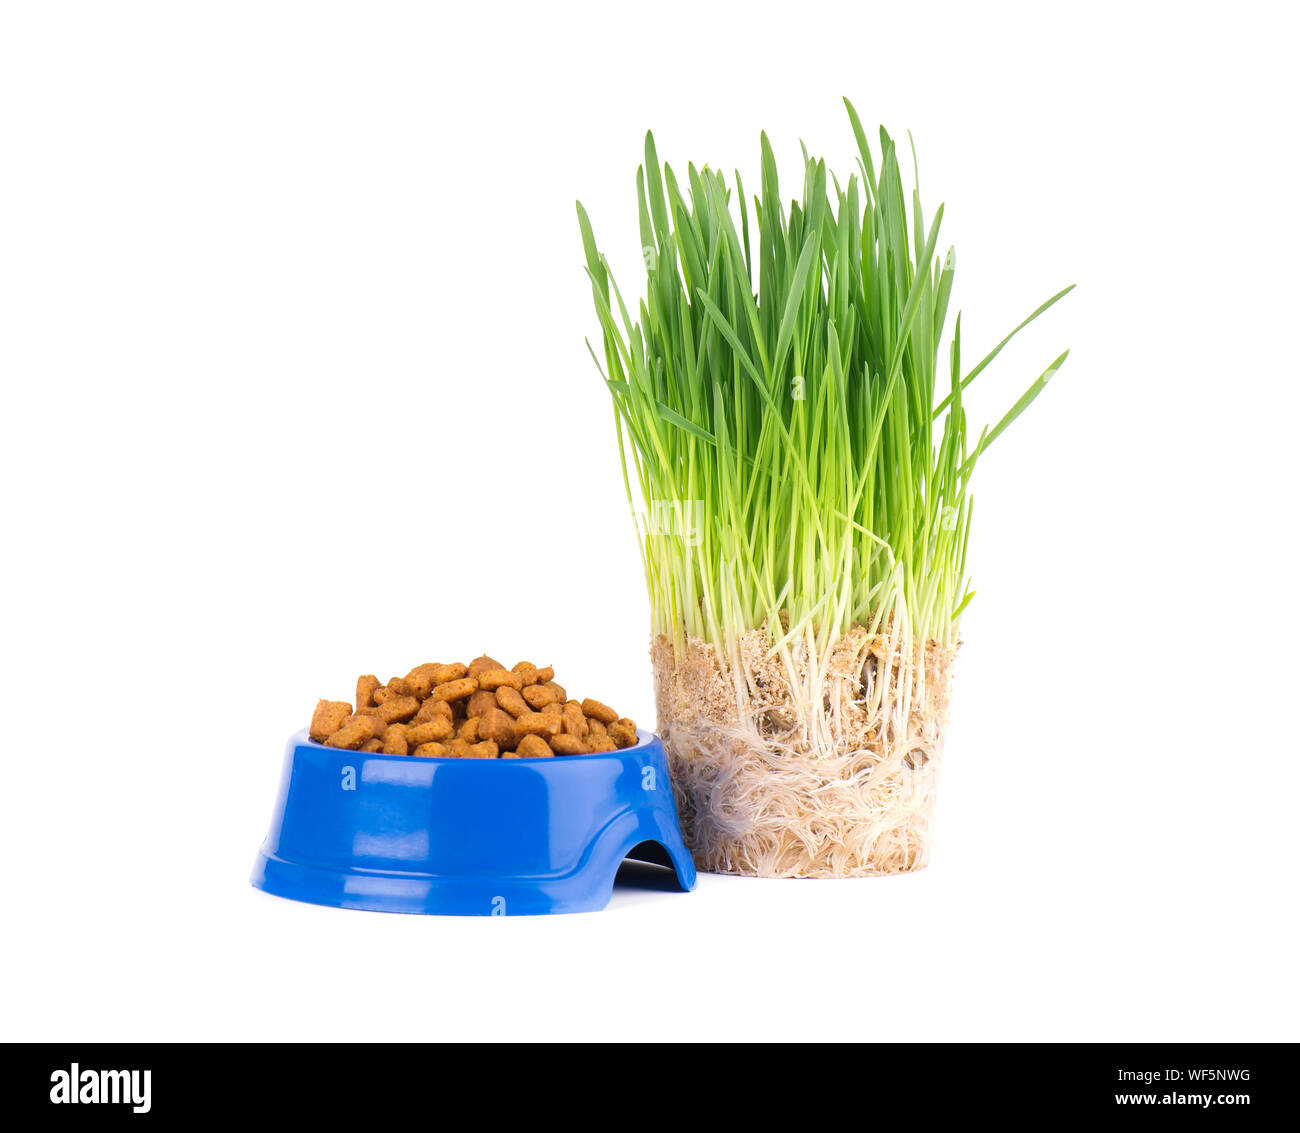 Dry cat food in a blue bowl. Fresh grass for cats. Isolated on white background Stock Photo